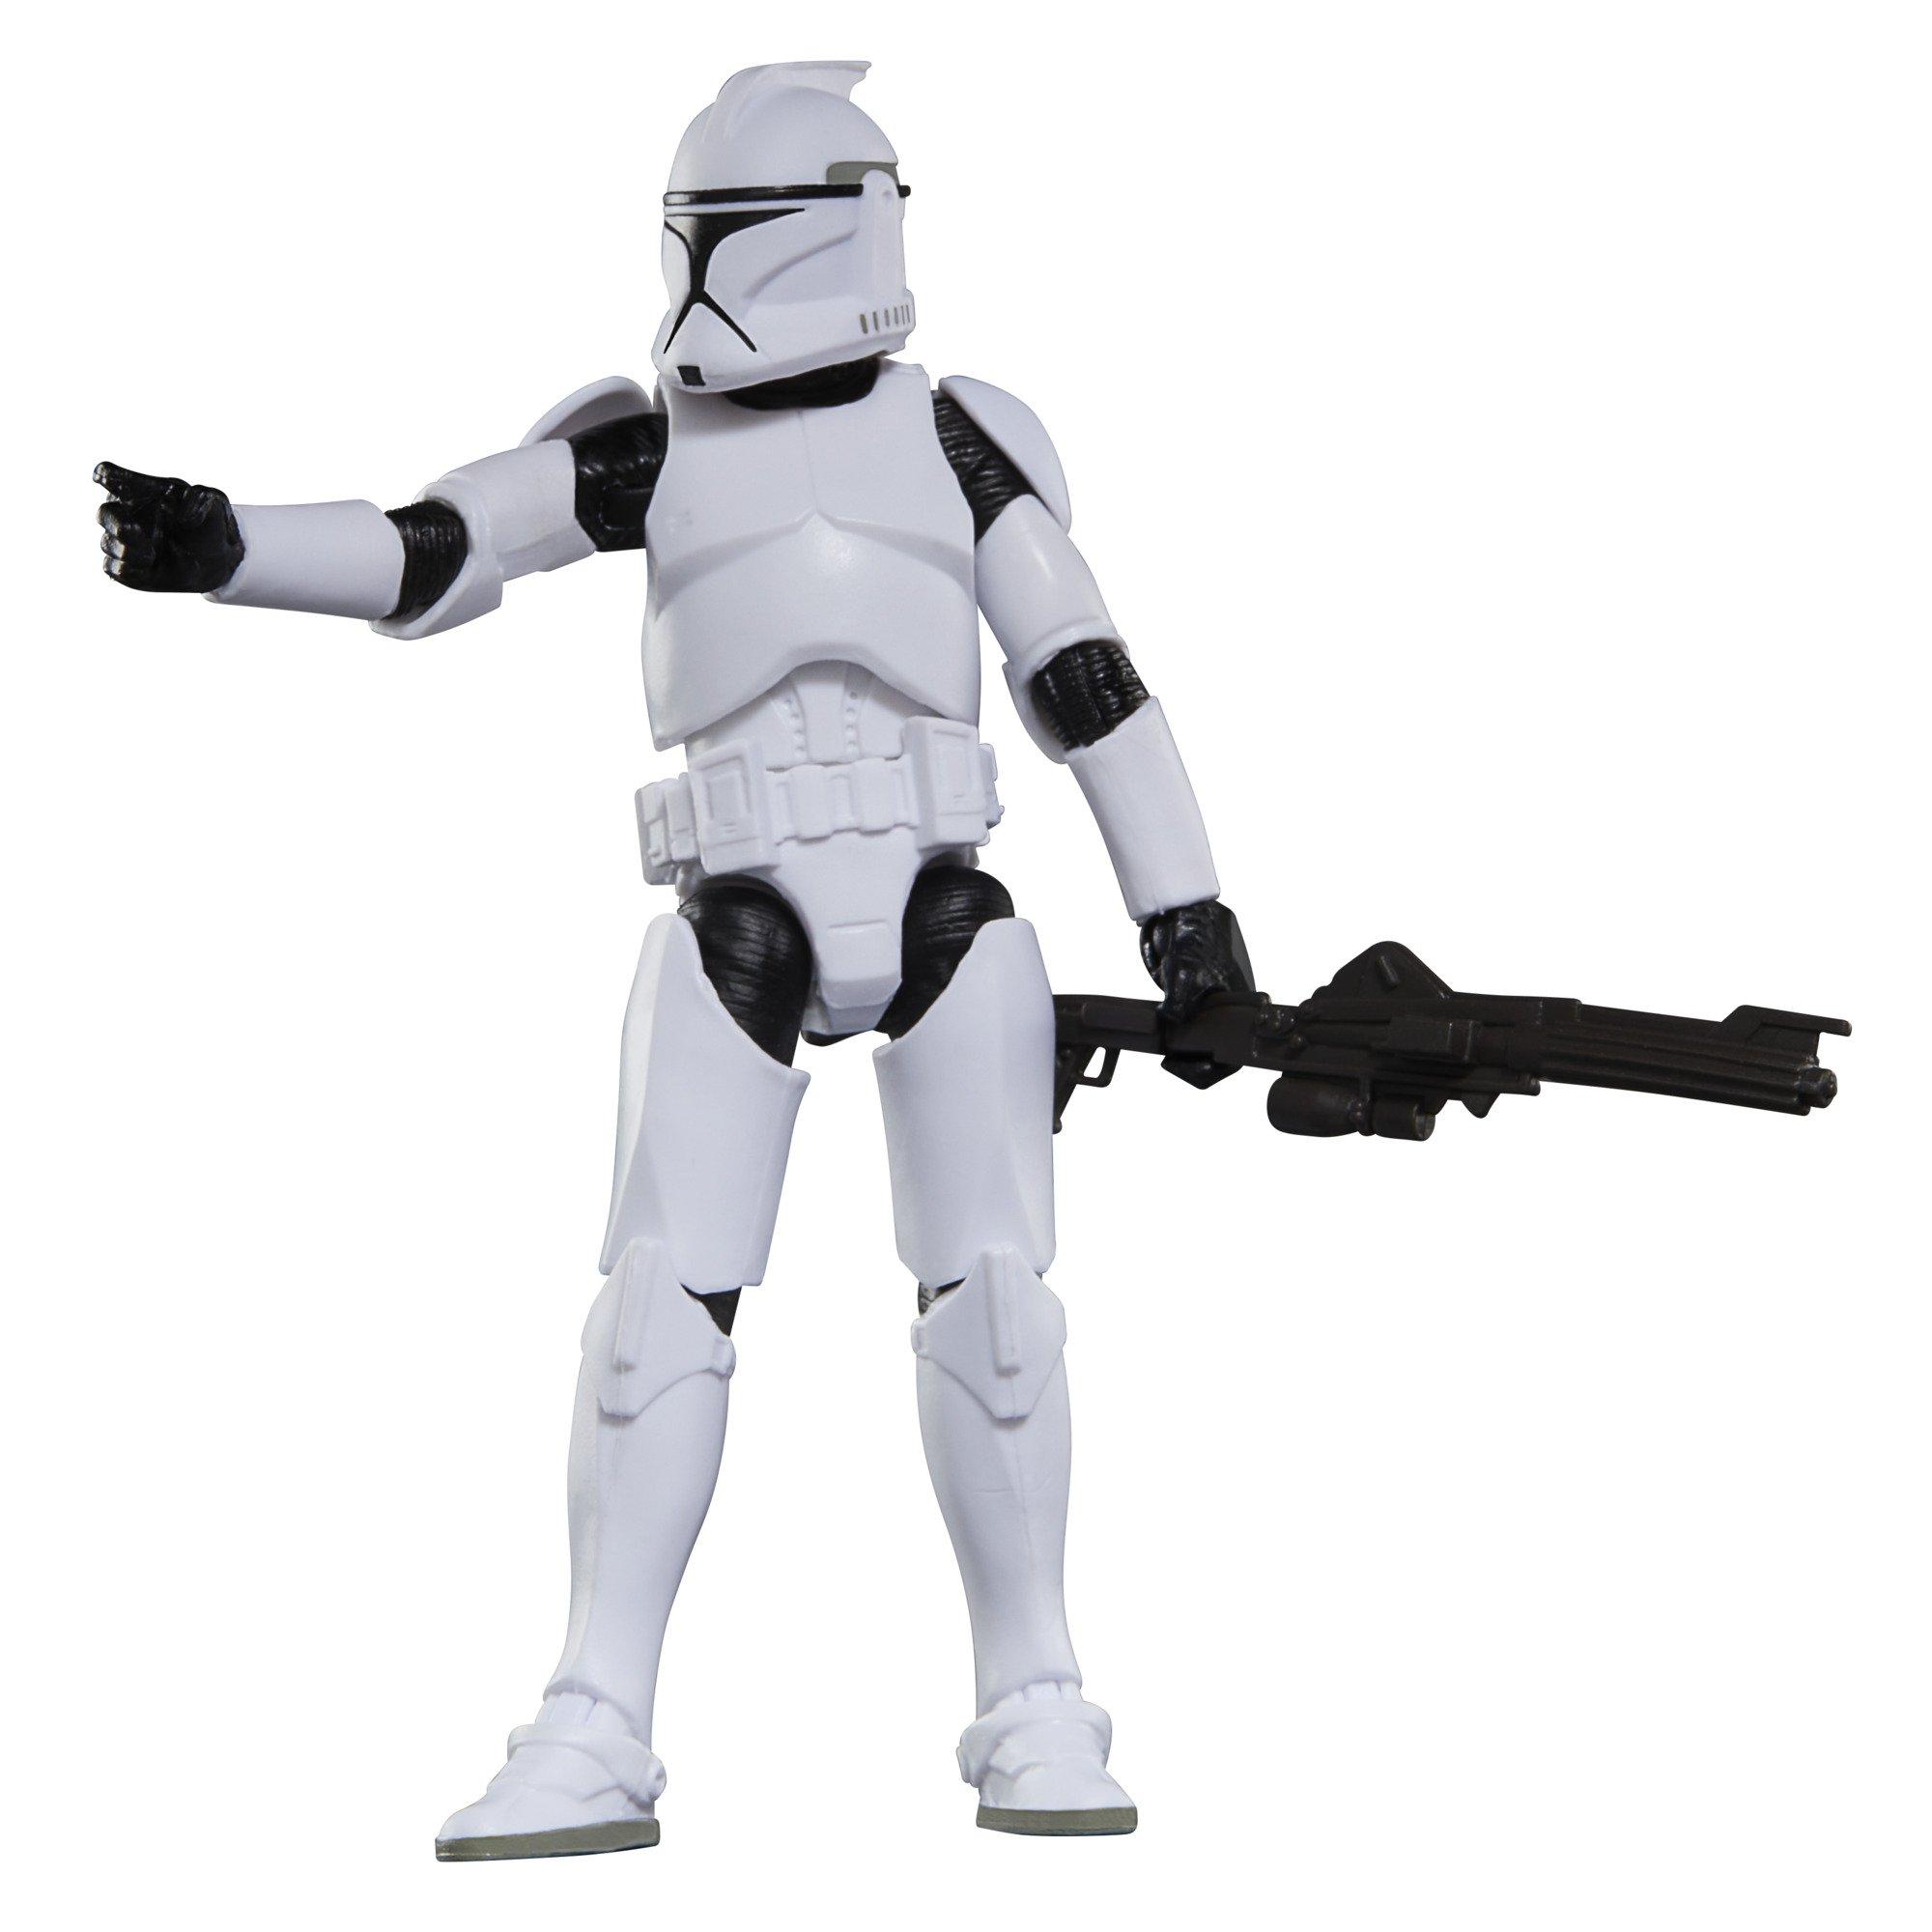 Hasbro Star Wars: The Black Series Star Wars: Attack of the Clones - Clone Trooper 3.75-in Action Figure